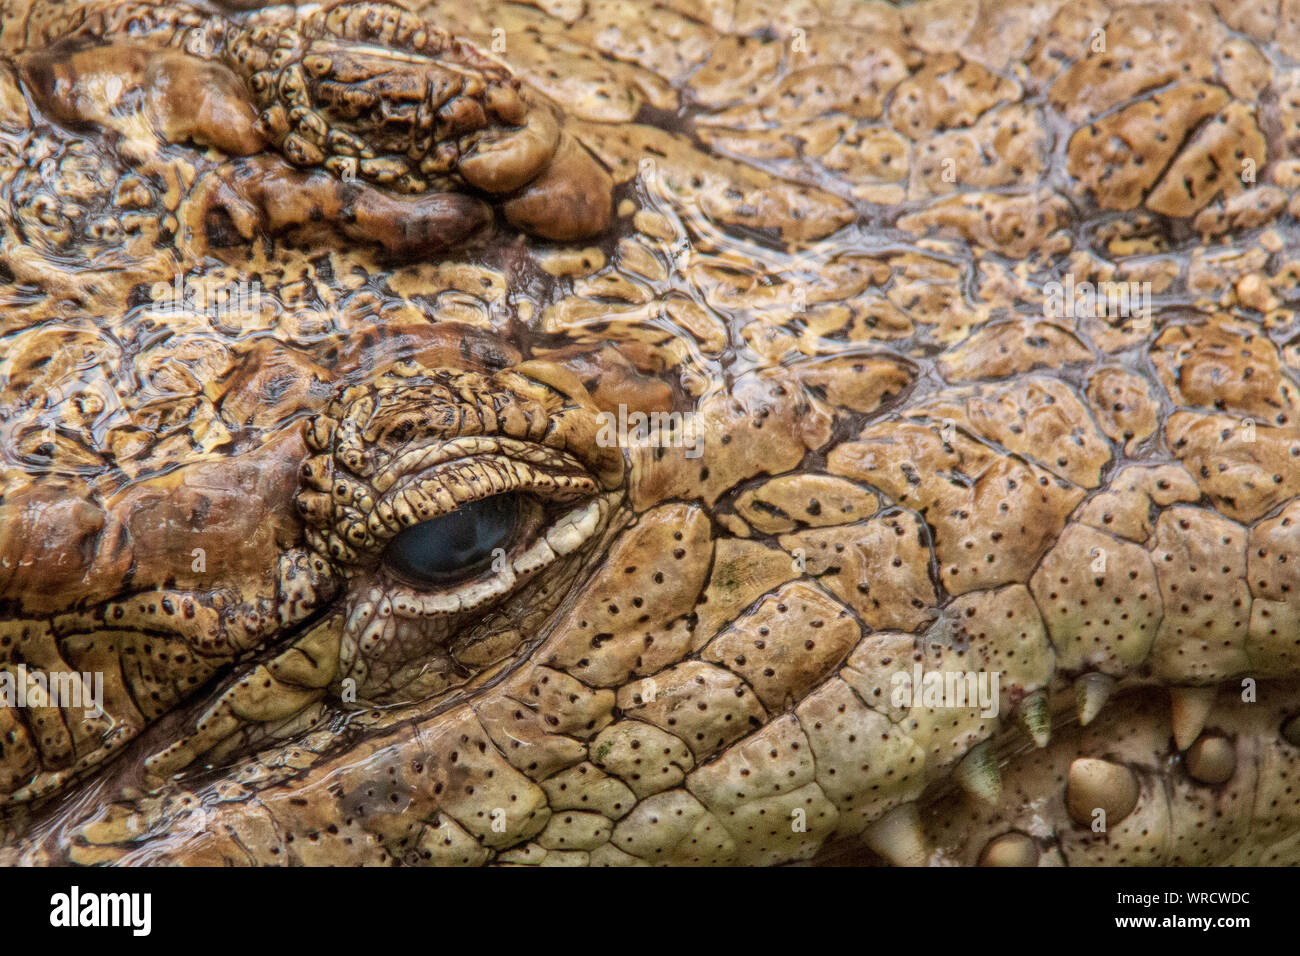 Close-up view of the eyes and jaws of a spectacled caiman (Caiman crocodilus) in the water Stock Photo